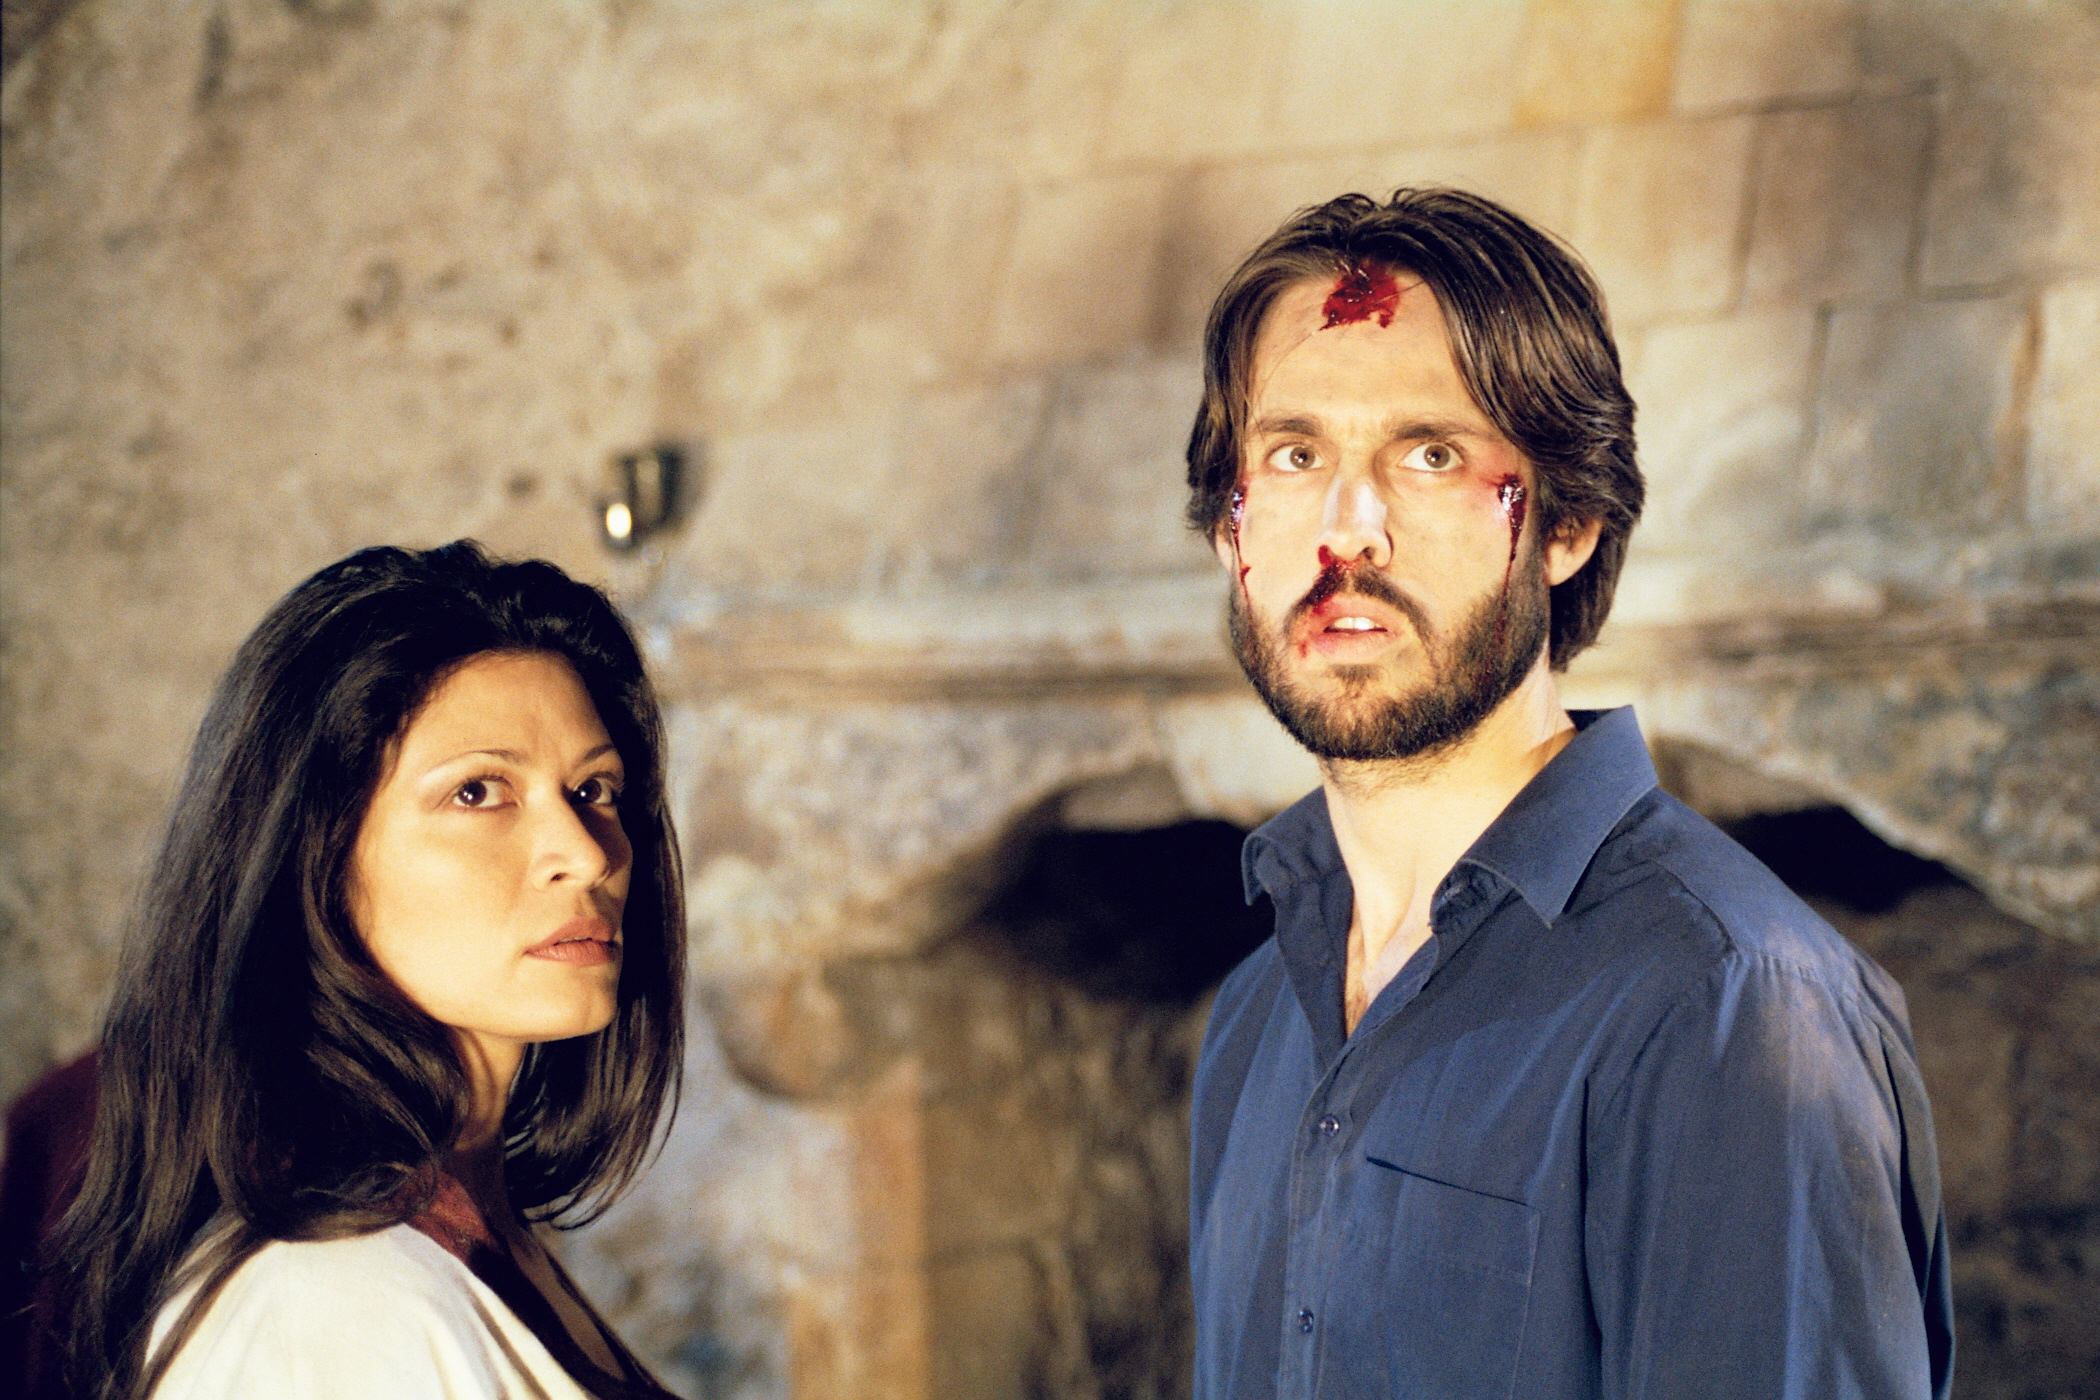 Claudia Coulter With Jonathan Sidgwick in The Witches Hammer